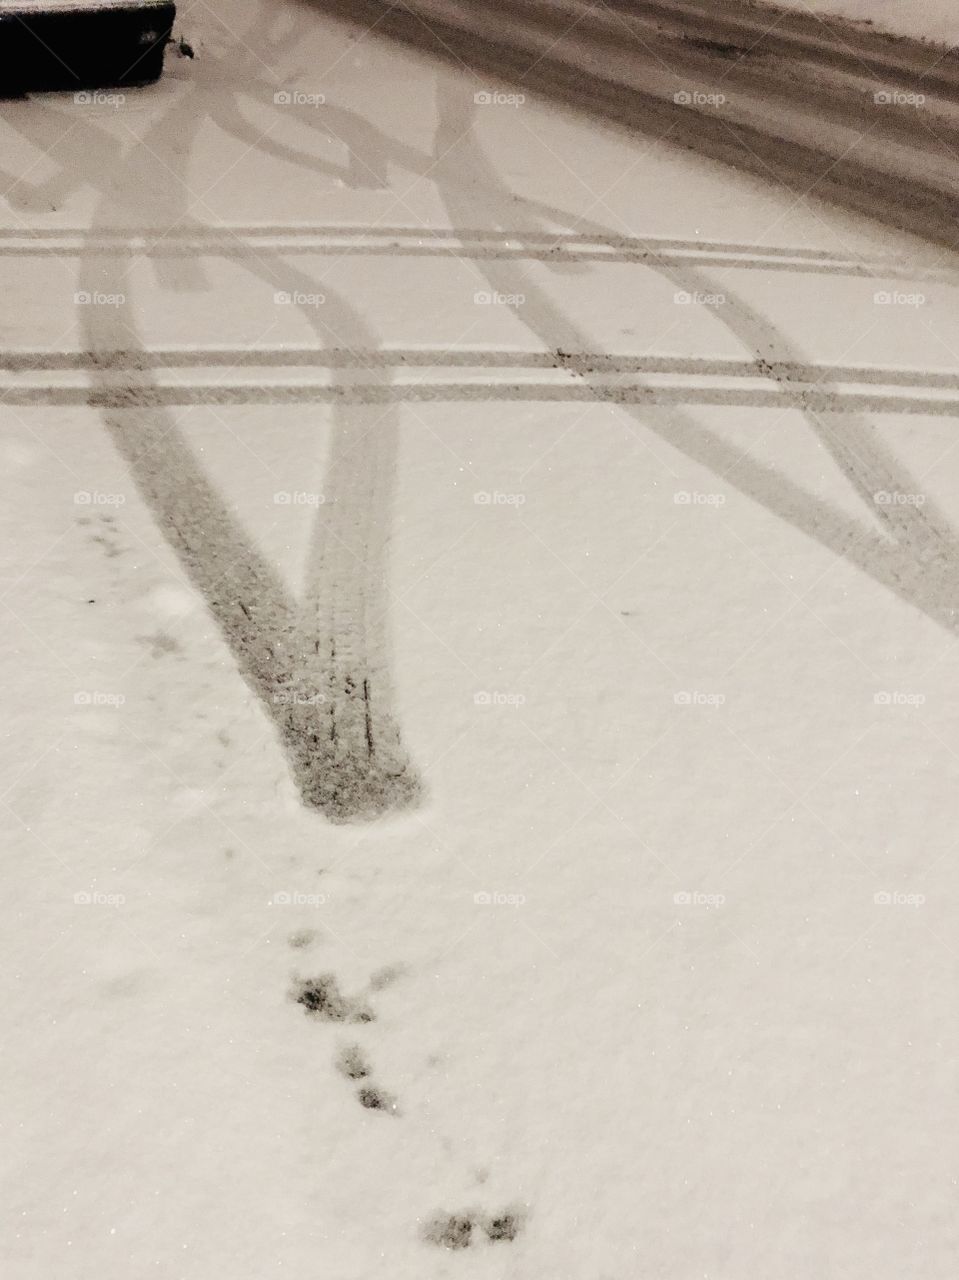 Tire Tracks in Snow-December 11 2018-Montreal, Quebec, Canada 